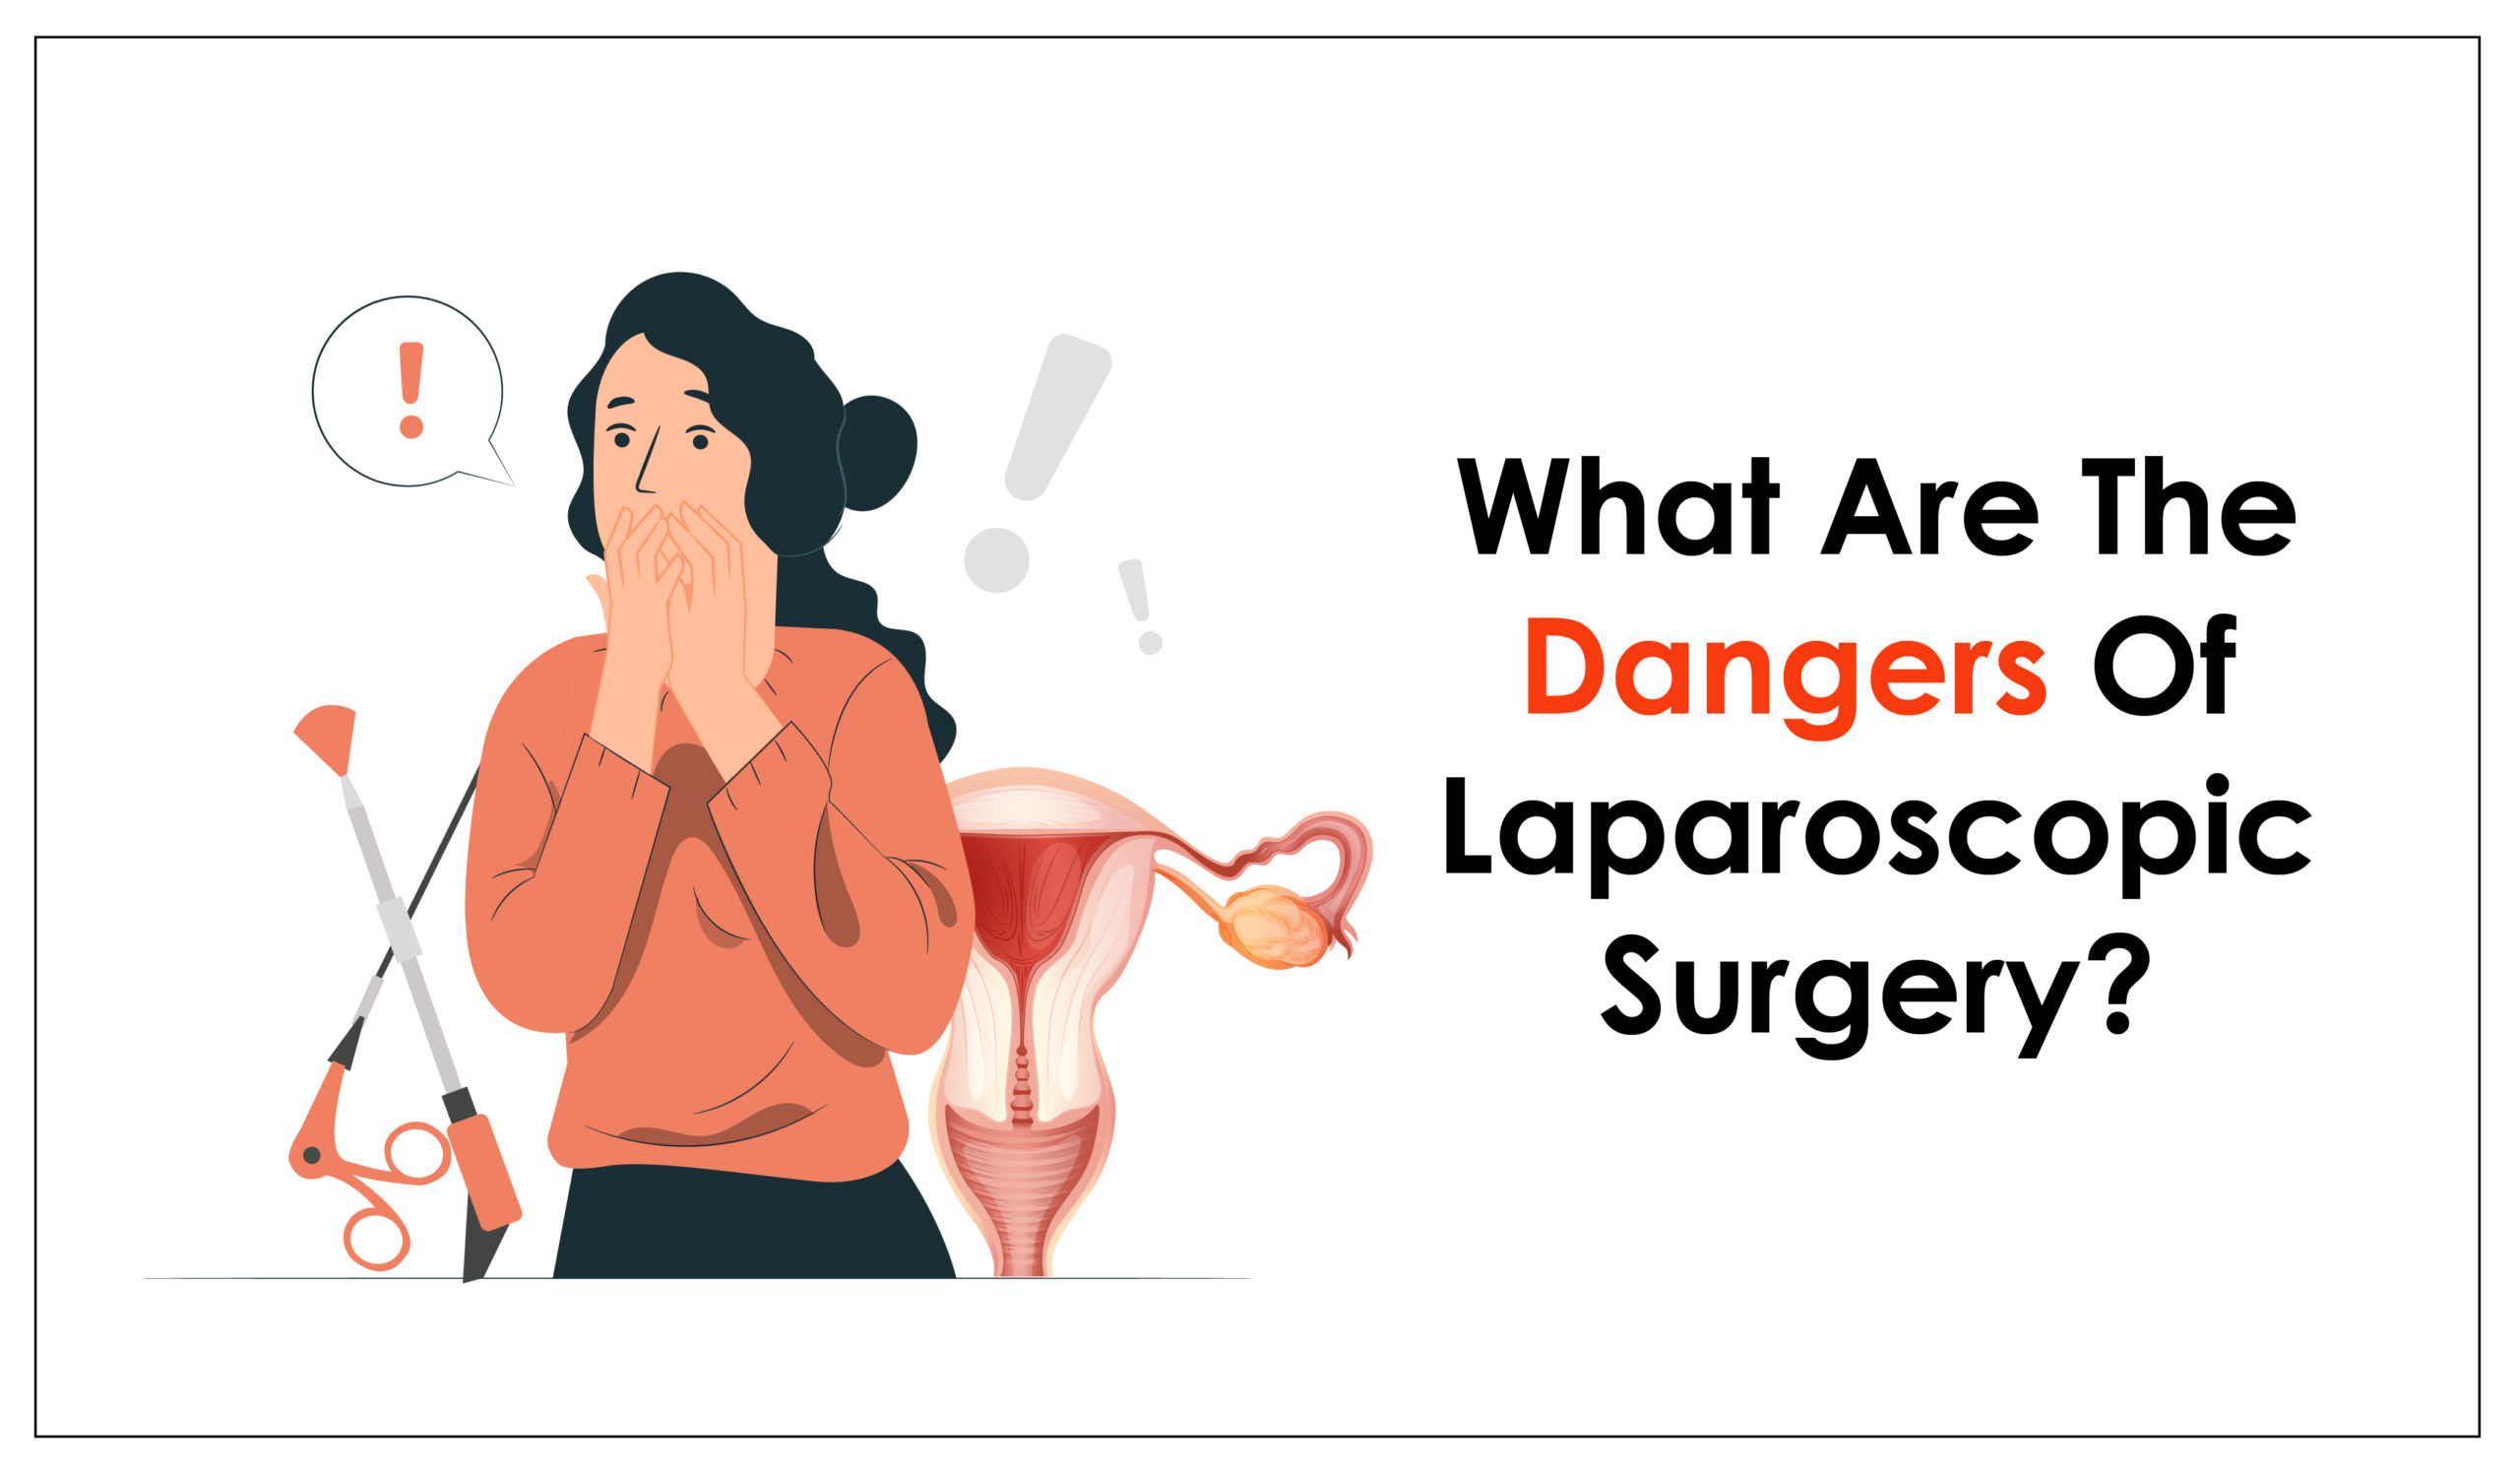 What are the dangers of laparoscopic surgery